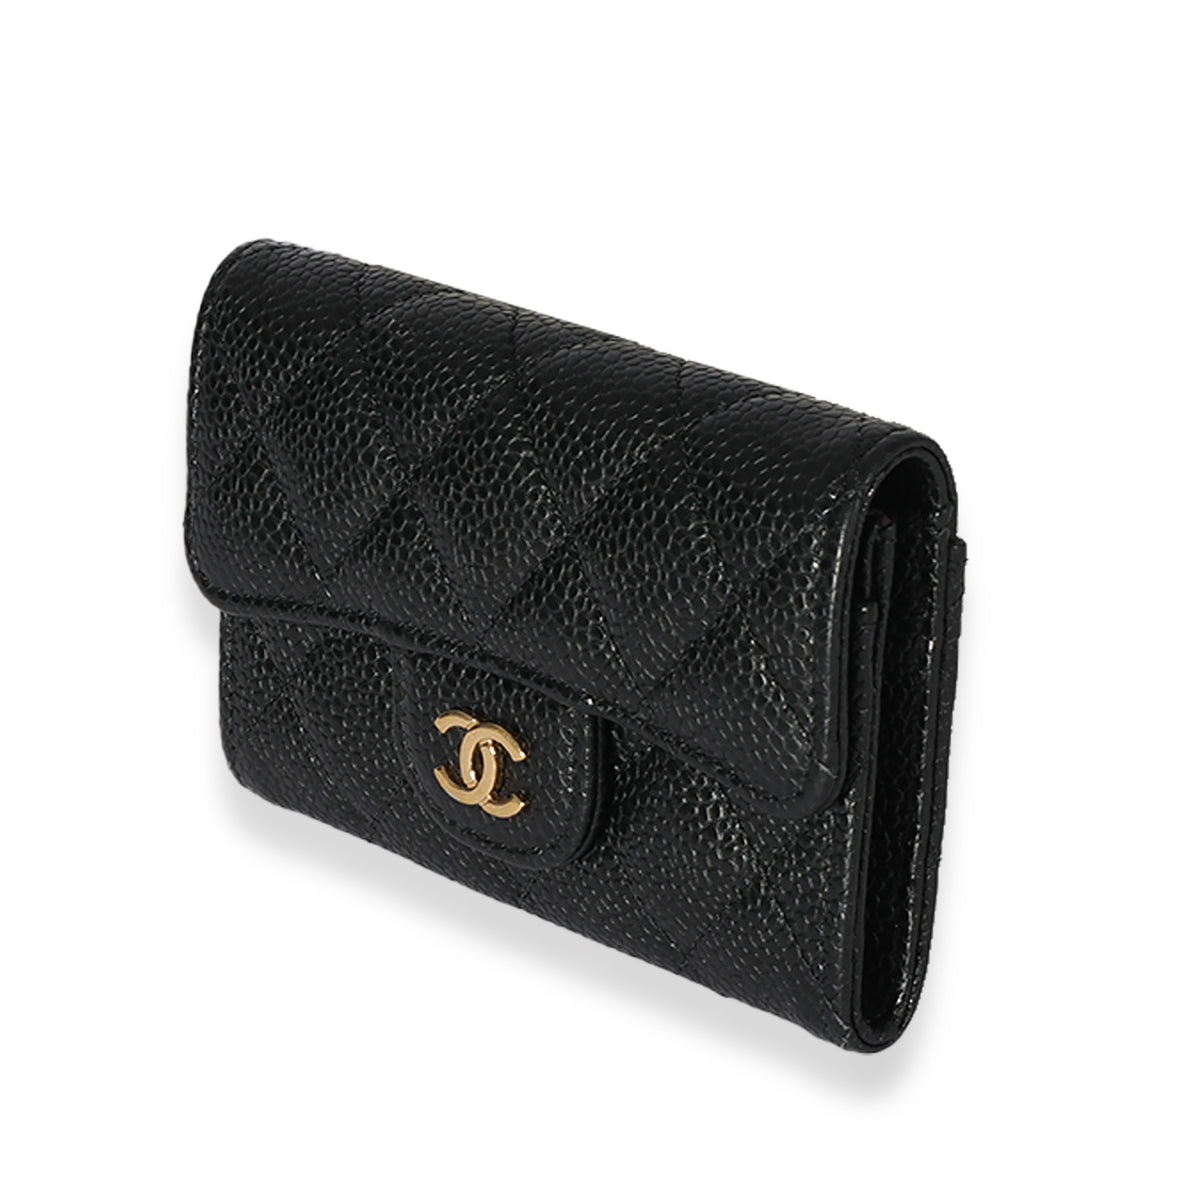 CHANEL Caviar Quilted Golden Class Phone Holder Black 251730